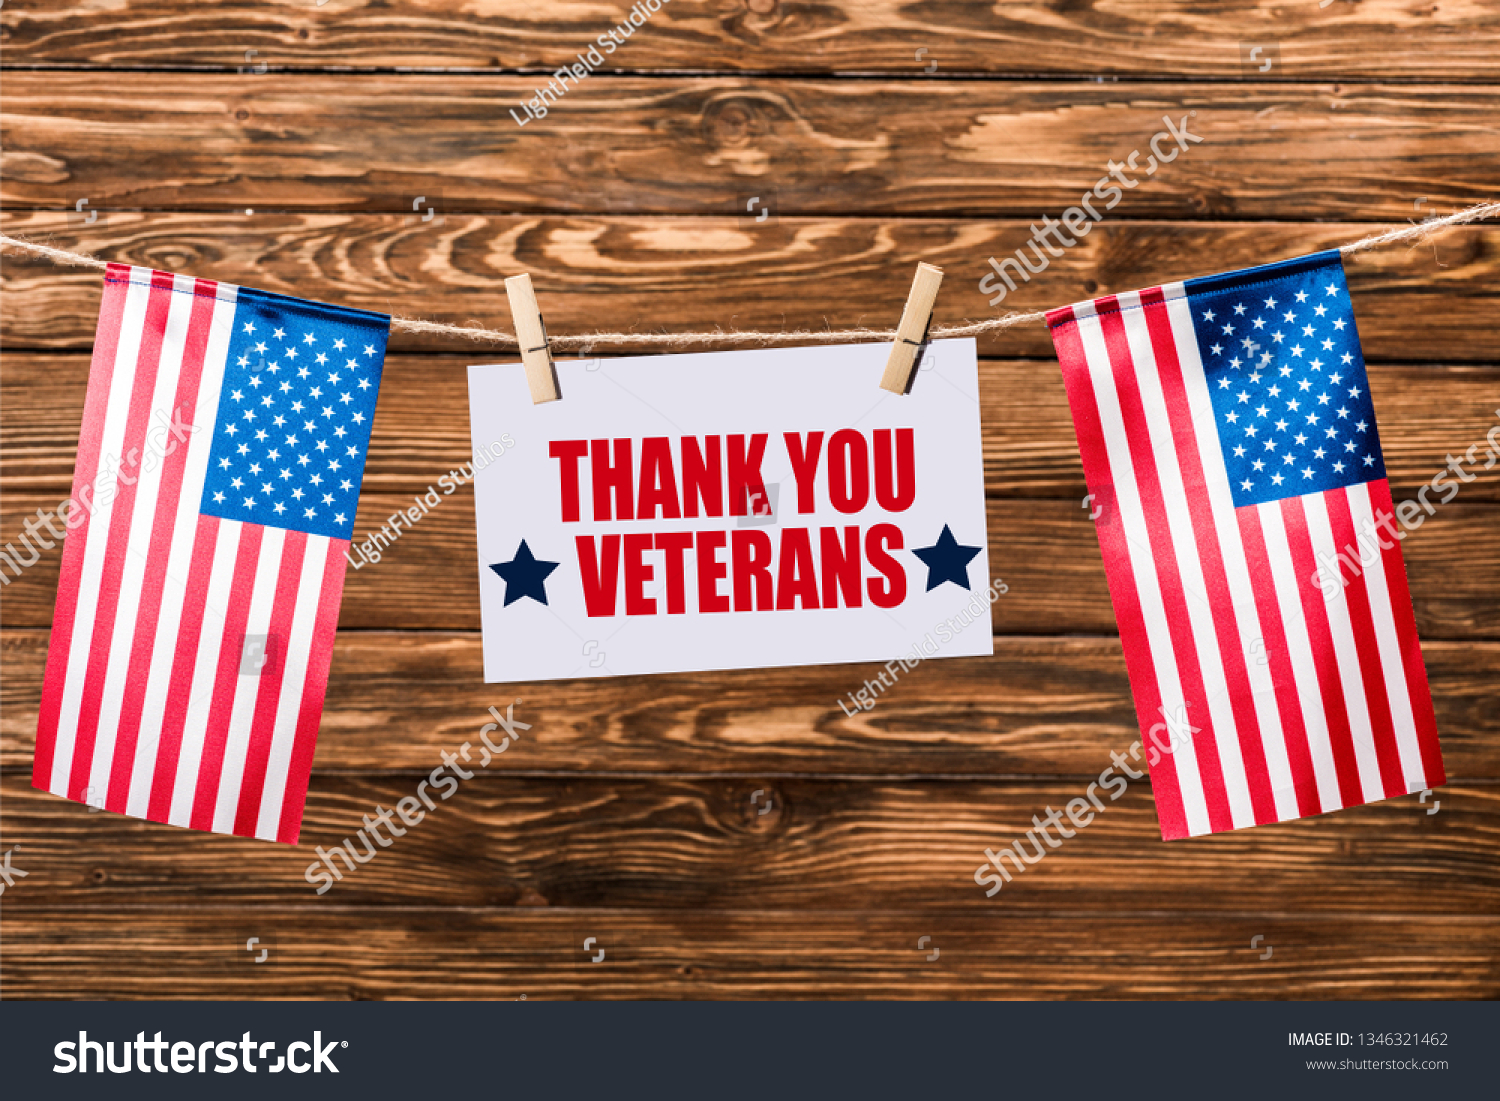 card with thank you veterans lettering hanging on string with pins and american flags on wooden background #1346321462